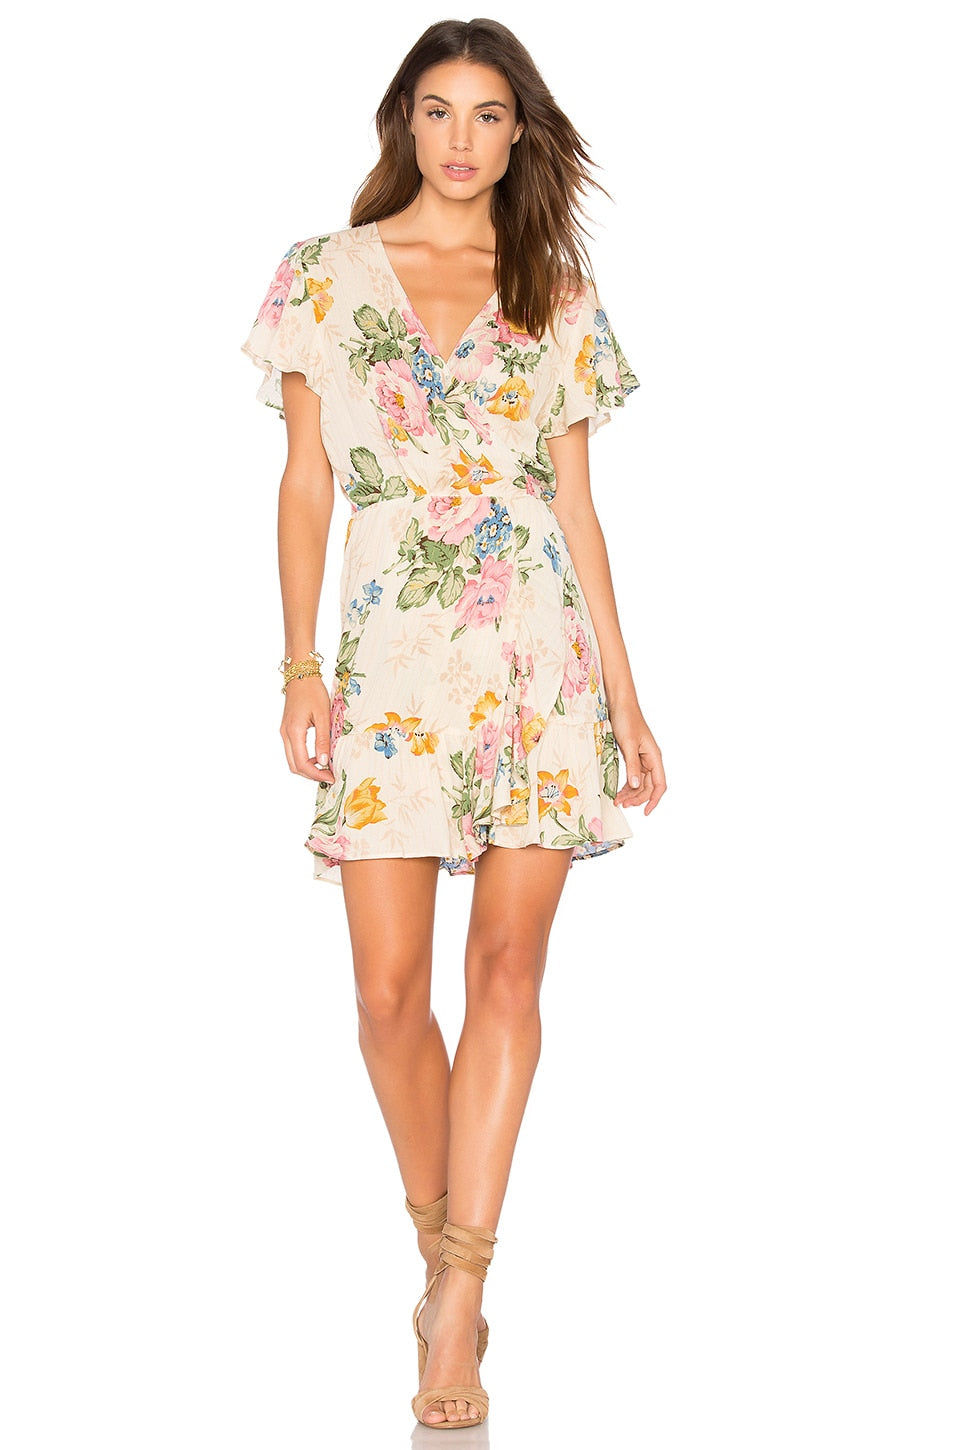 Upgrade your summer wardrobe with our Dress Auguste. This mini dress features a stylish print, lace up design, and a wrapped chest with a bow for a flattering fit. Perfect for any occasion, feel confident and chic all season long.